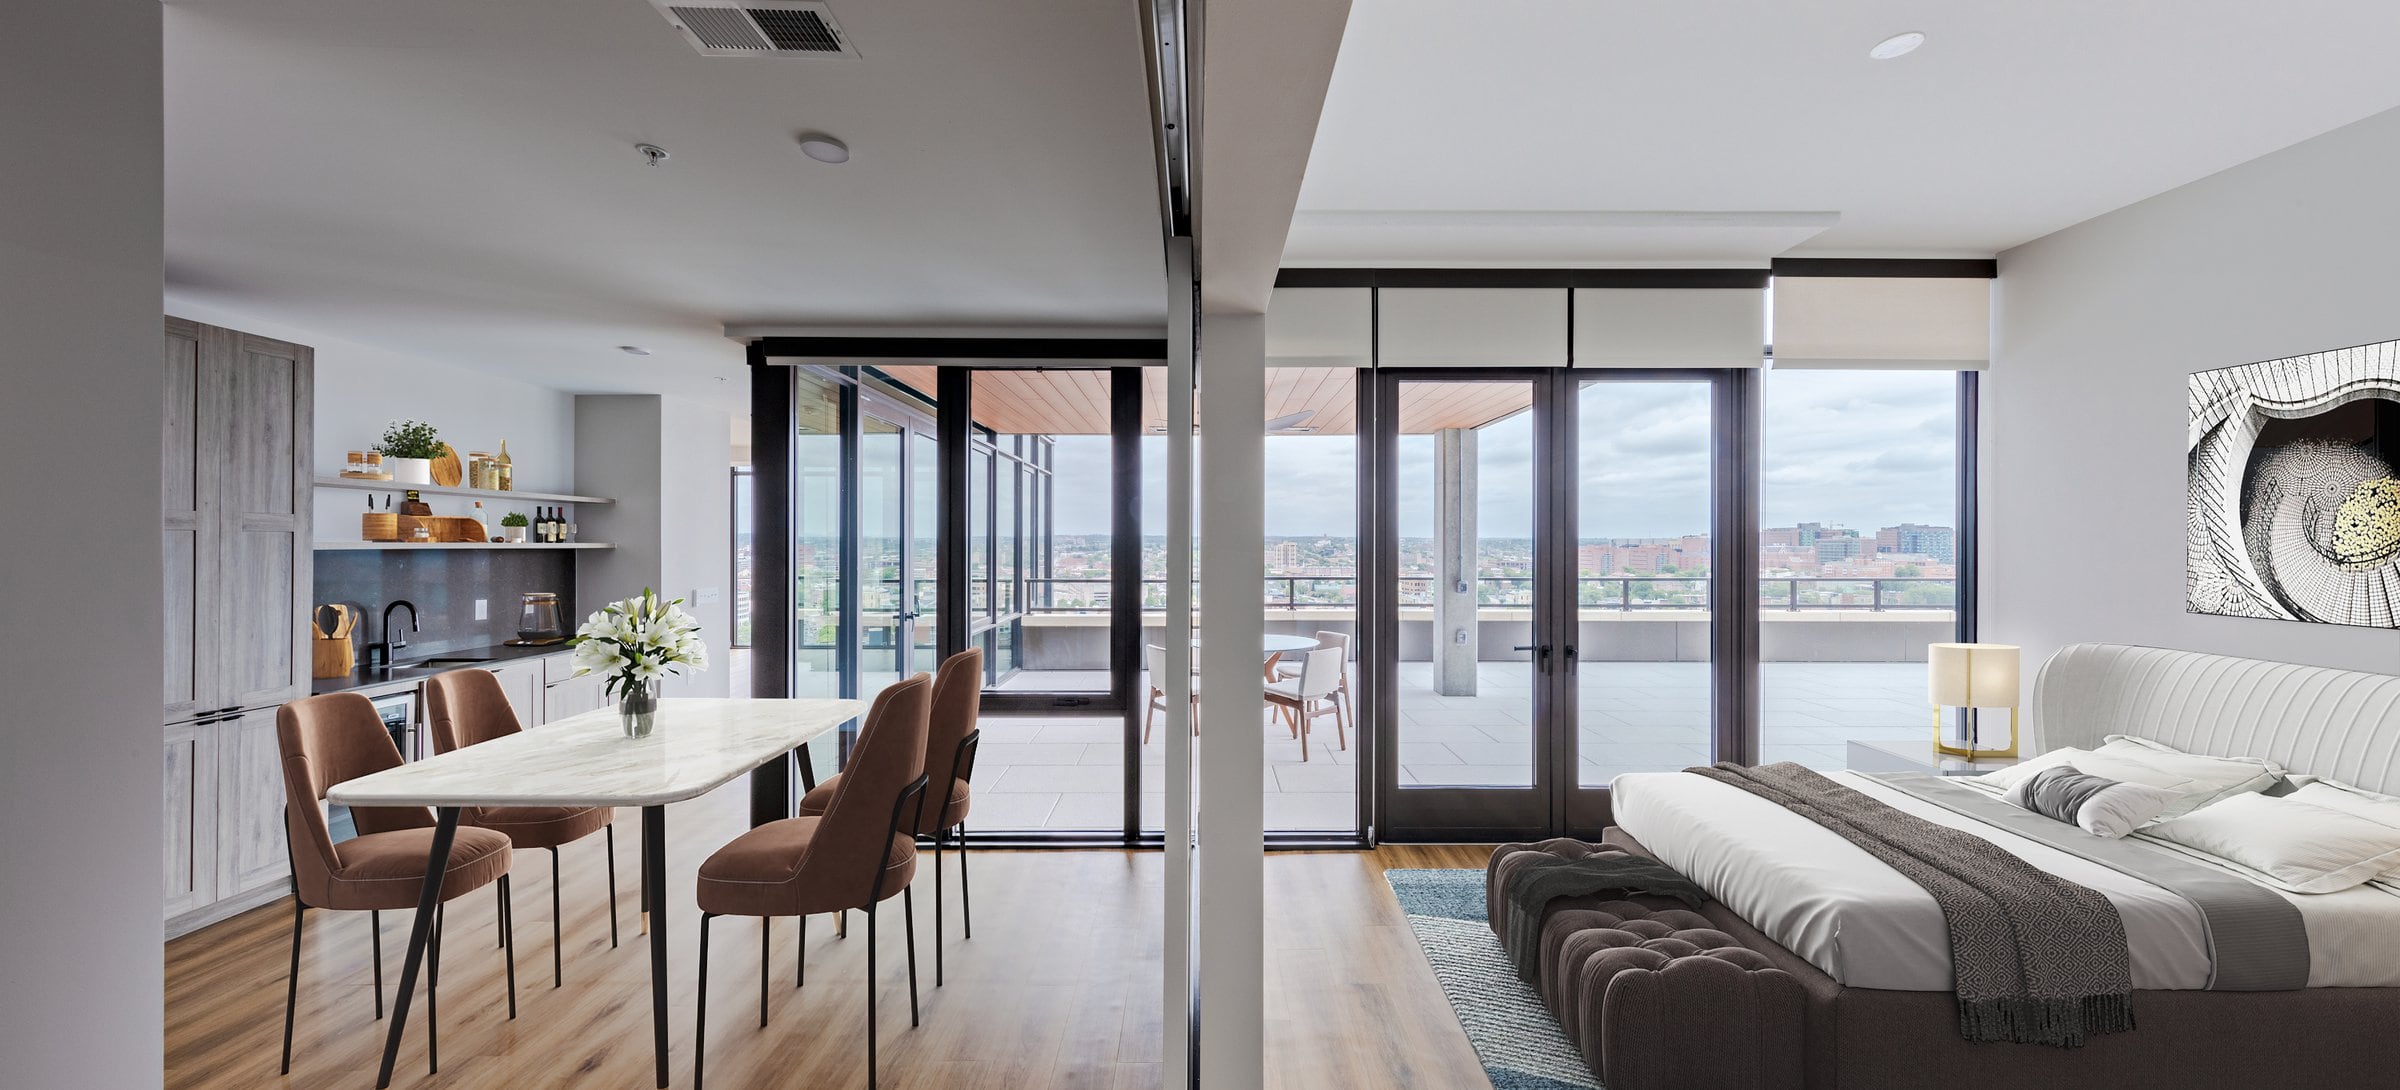 Penthouse-level Signature Collection apartment home bedroom with walk-out terrace